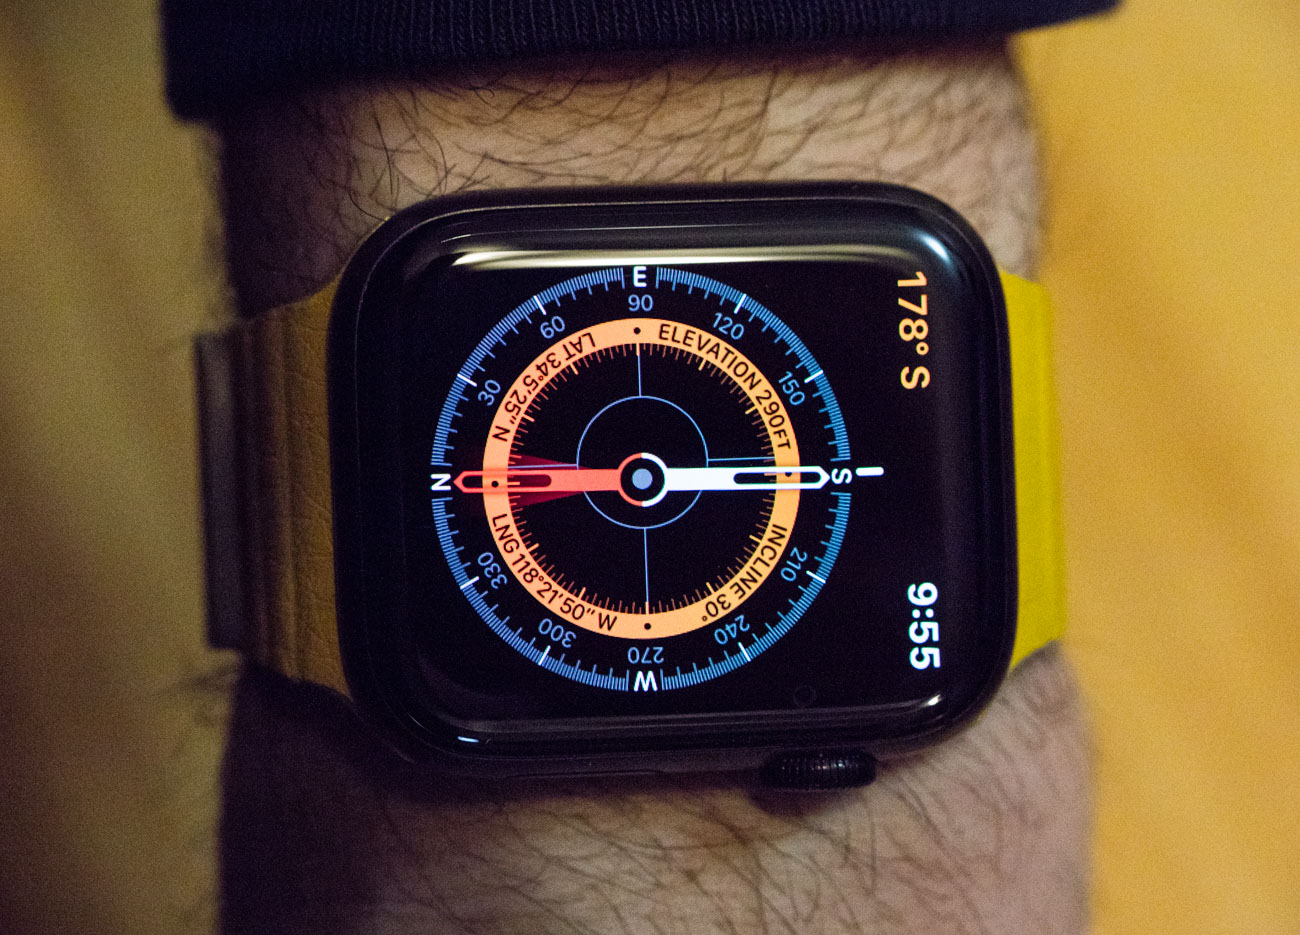 Apple Watch Series 5 Displays Information I Most Appreciate On My Wrist Featured Articles 